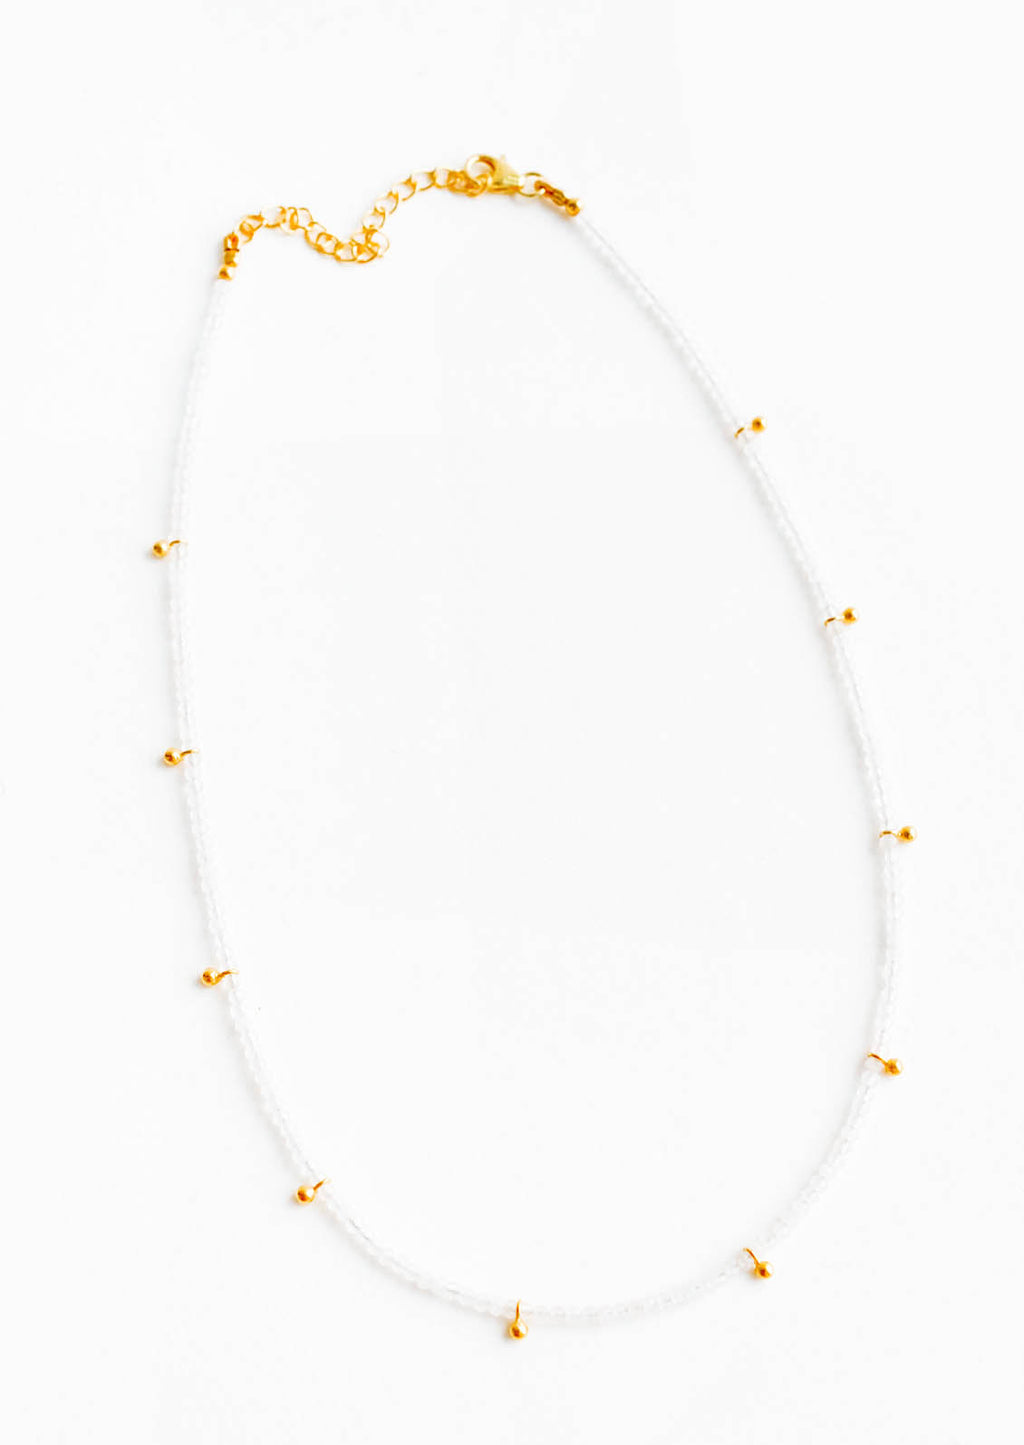 Moonstone: A necklace of clear gray gemstones with evenly spaced gold beads and a golden chain clasp.